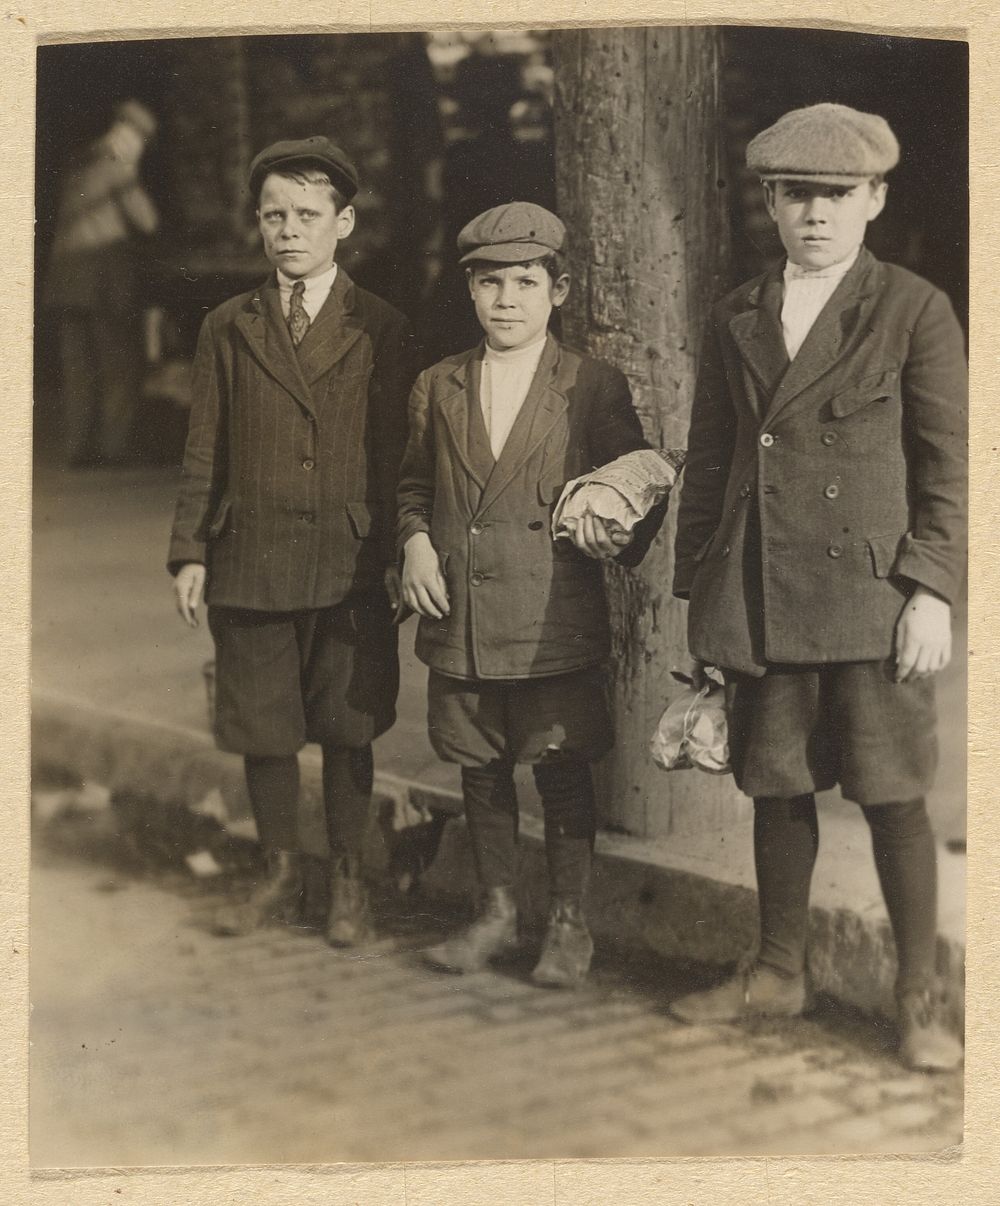 Three Boys on City Street in Knickers and Caps by Lewis W Hine